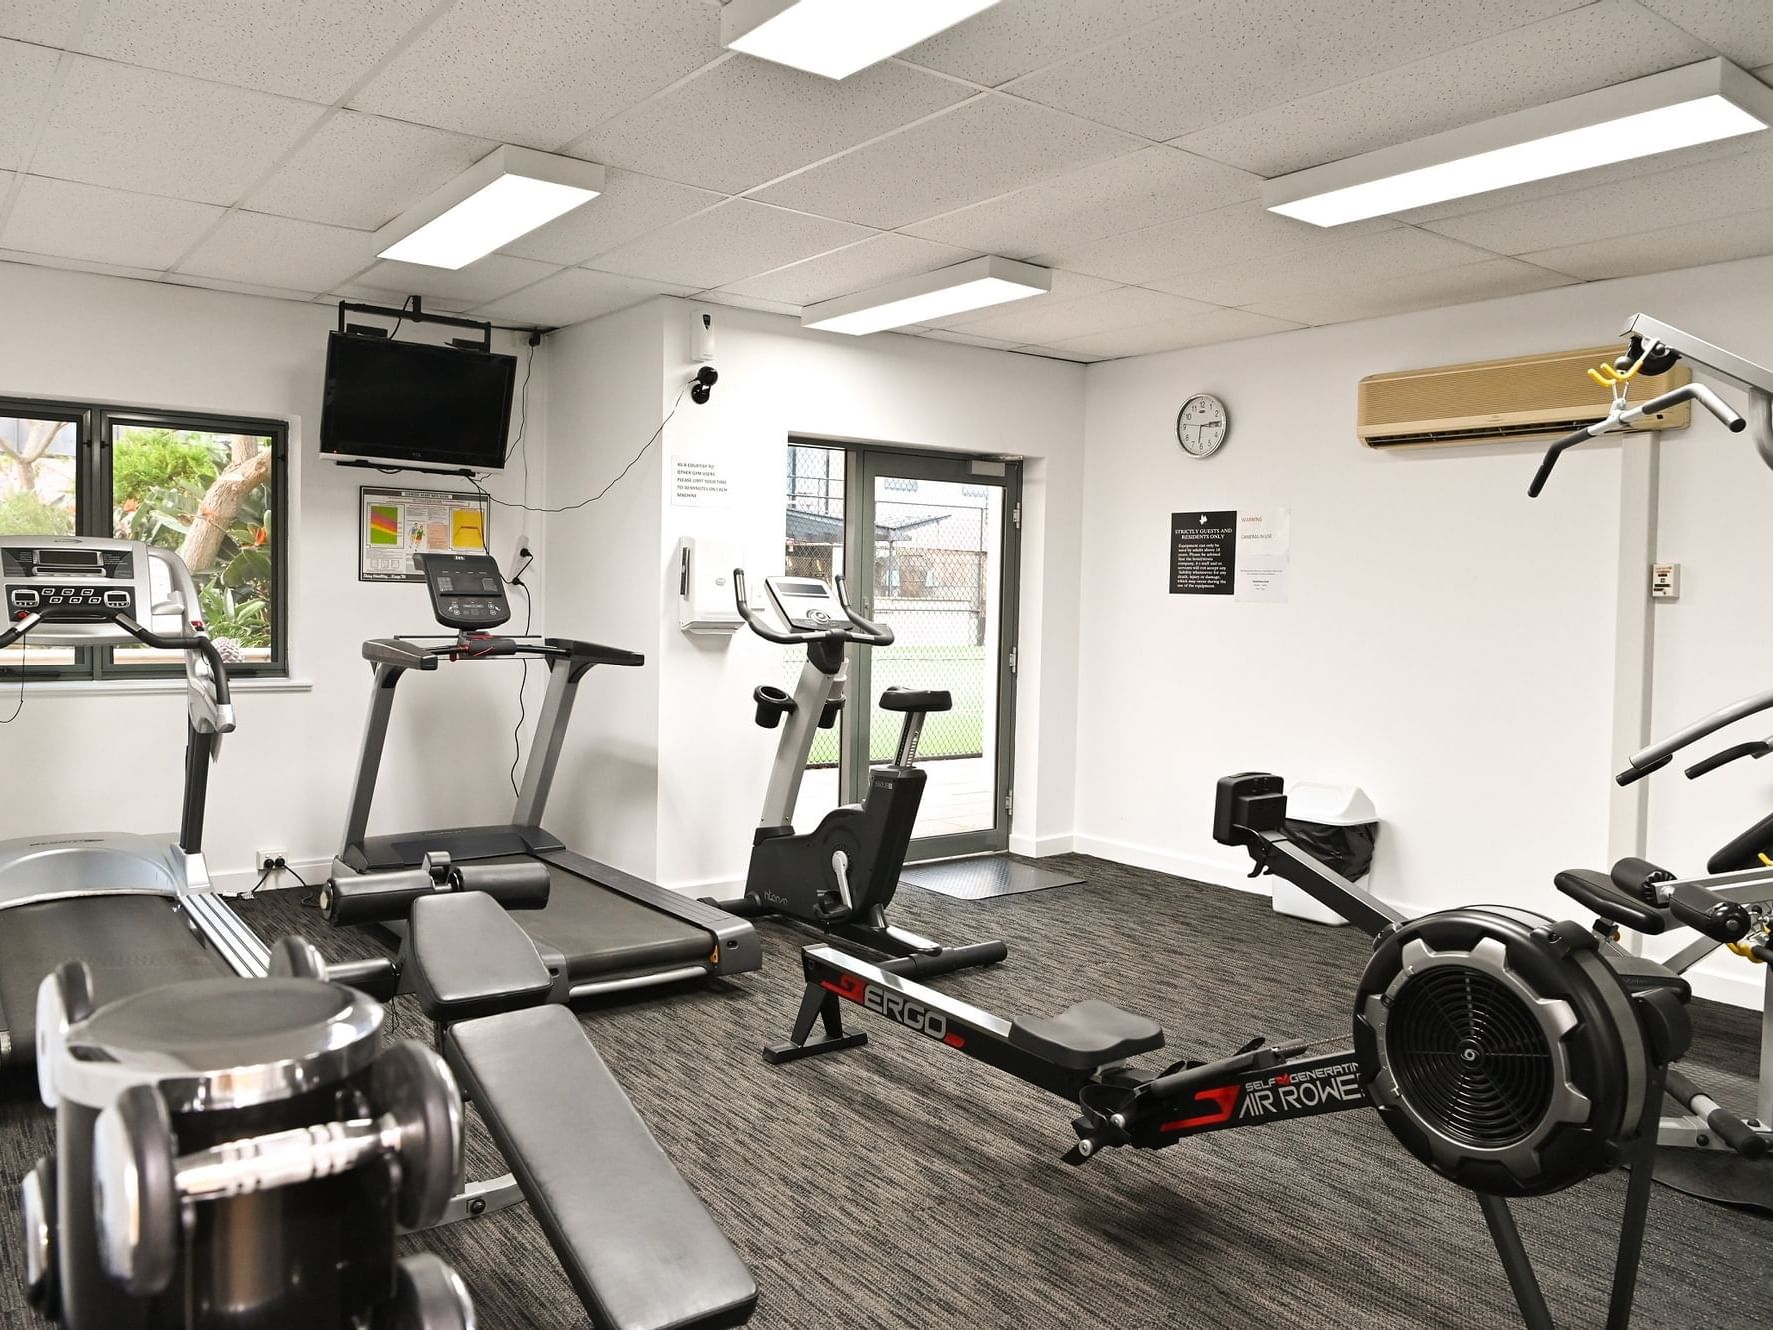 Treadmills & exercise equipment in the Gym at Nesuto Mounts Bay